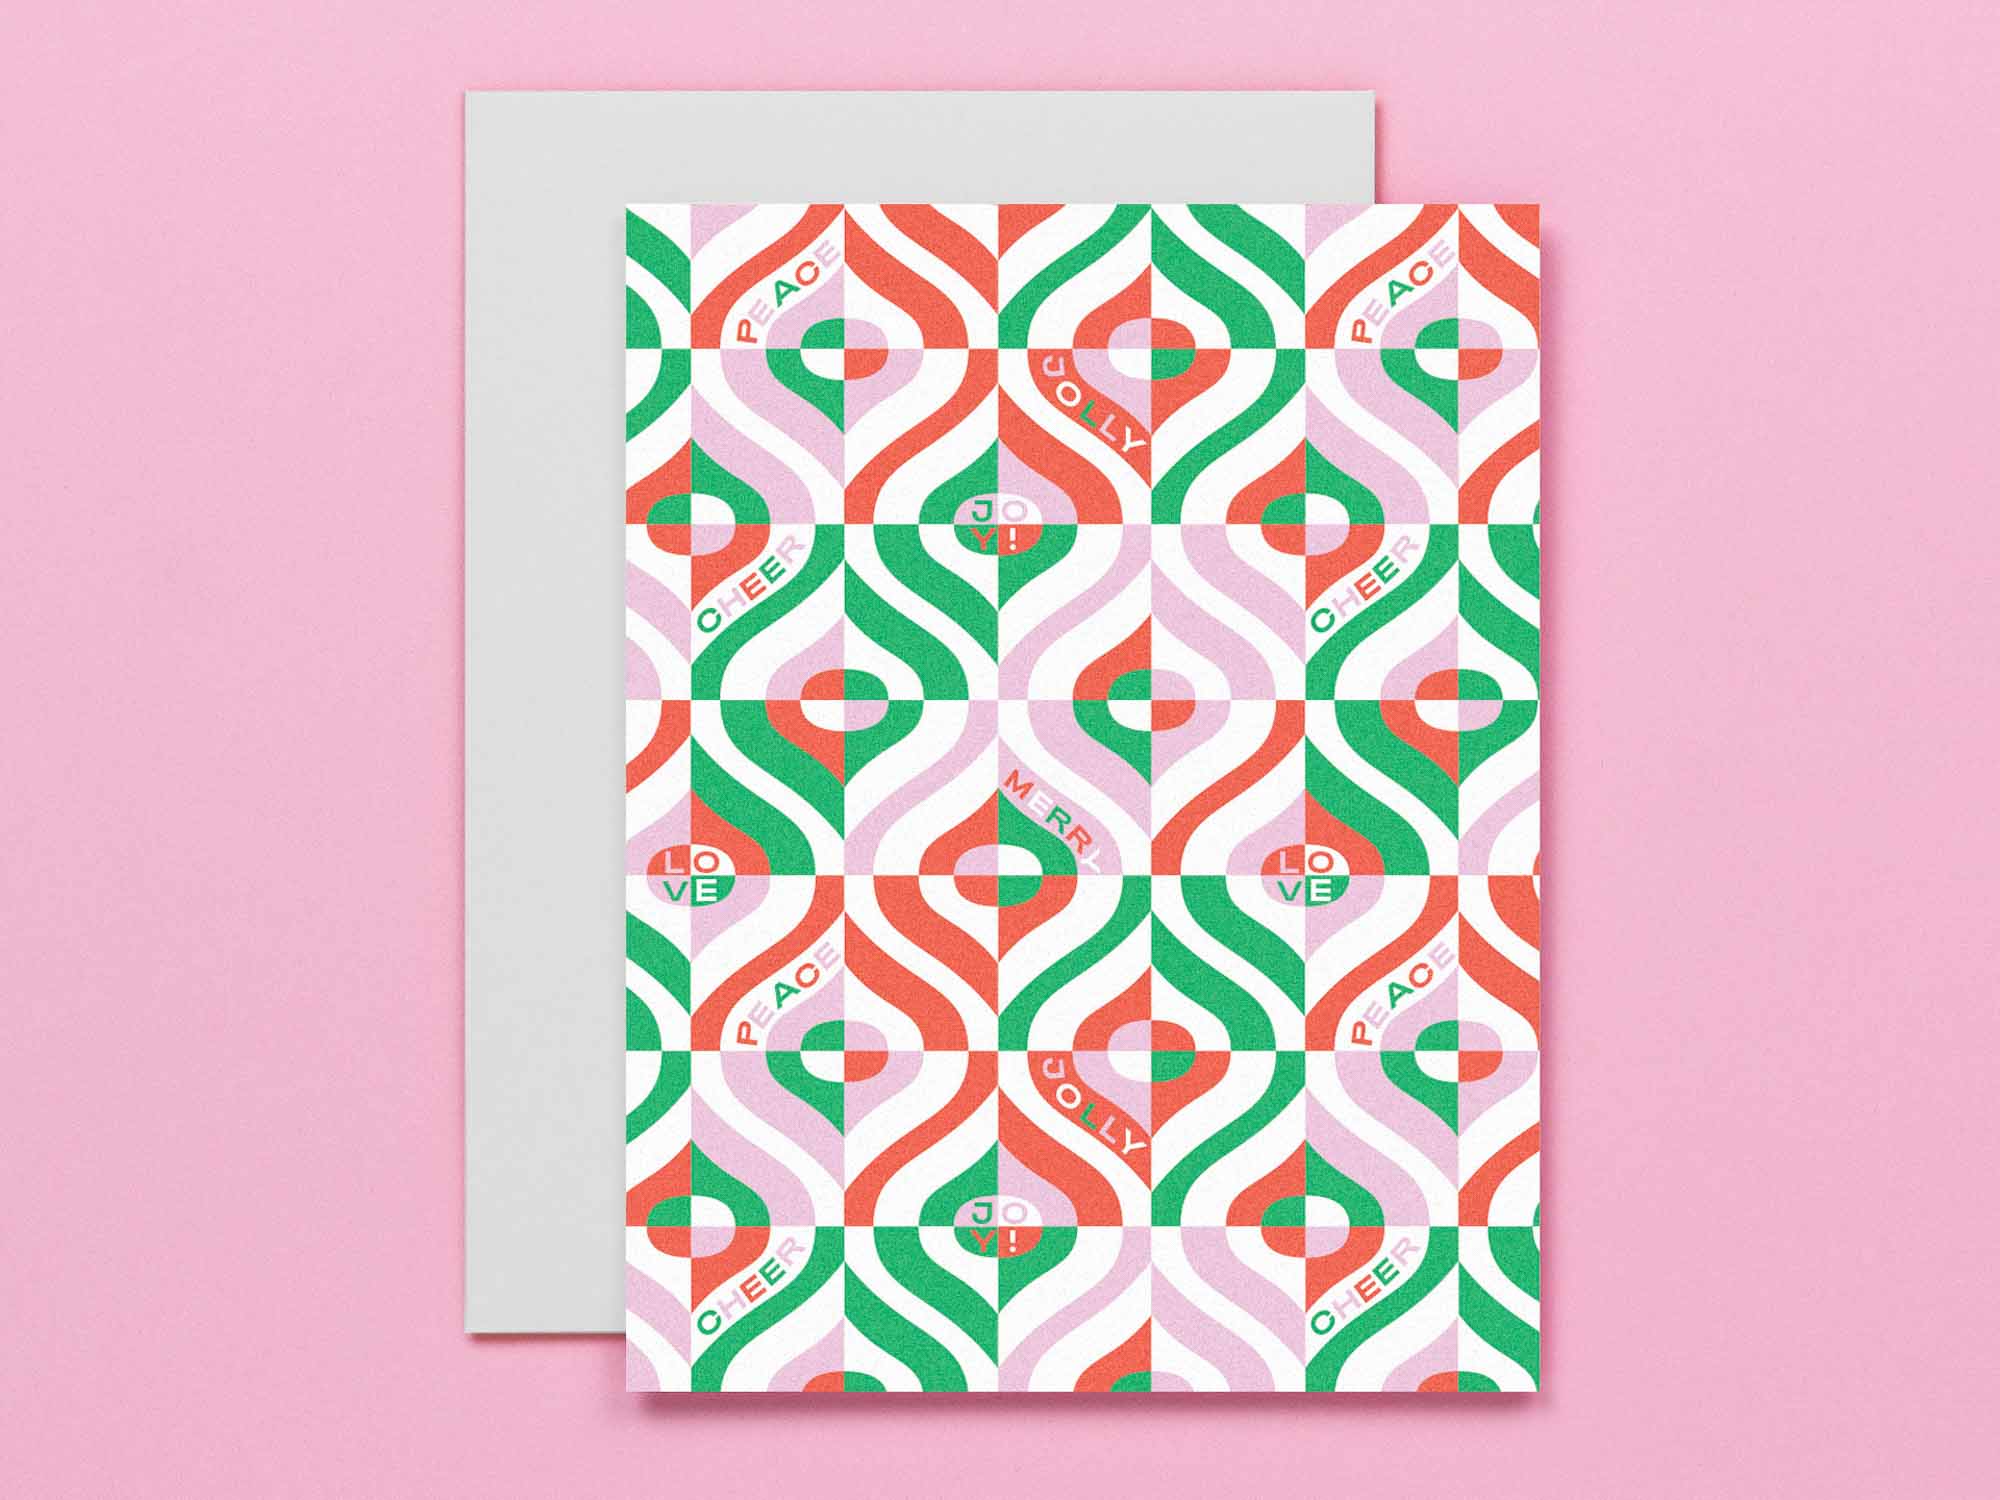 Mid-century inspired pattern holiday card with festive holiday phrases: peace, love, merry, jolly, cheer. Made in USA by @mydarlin_bk